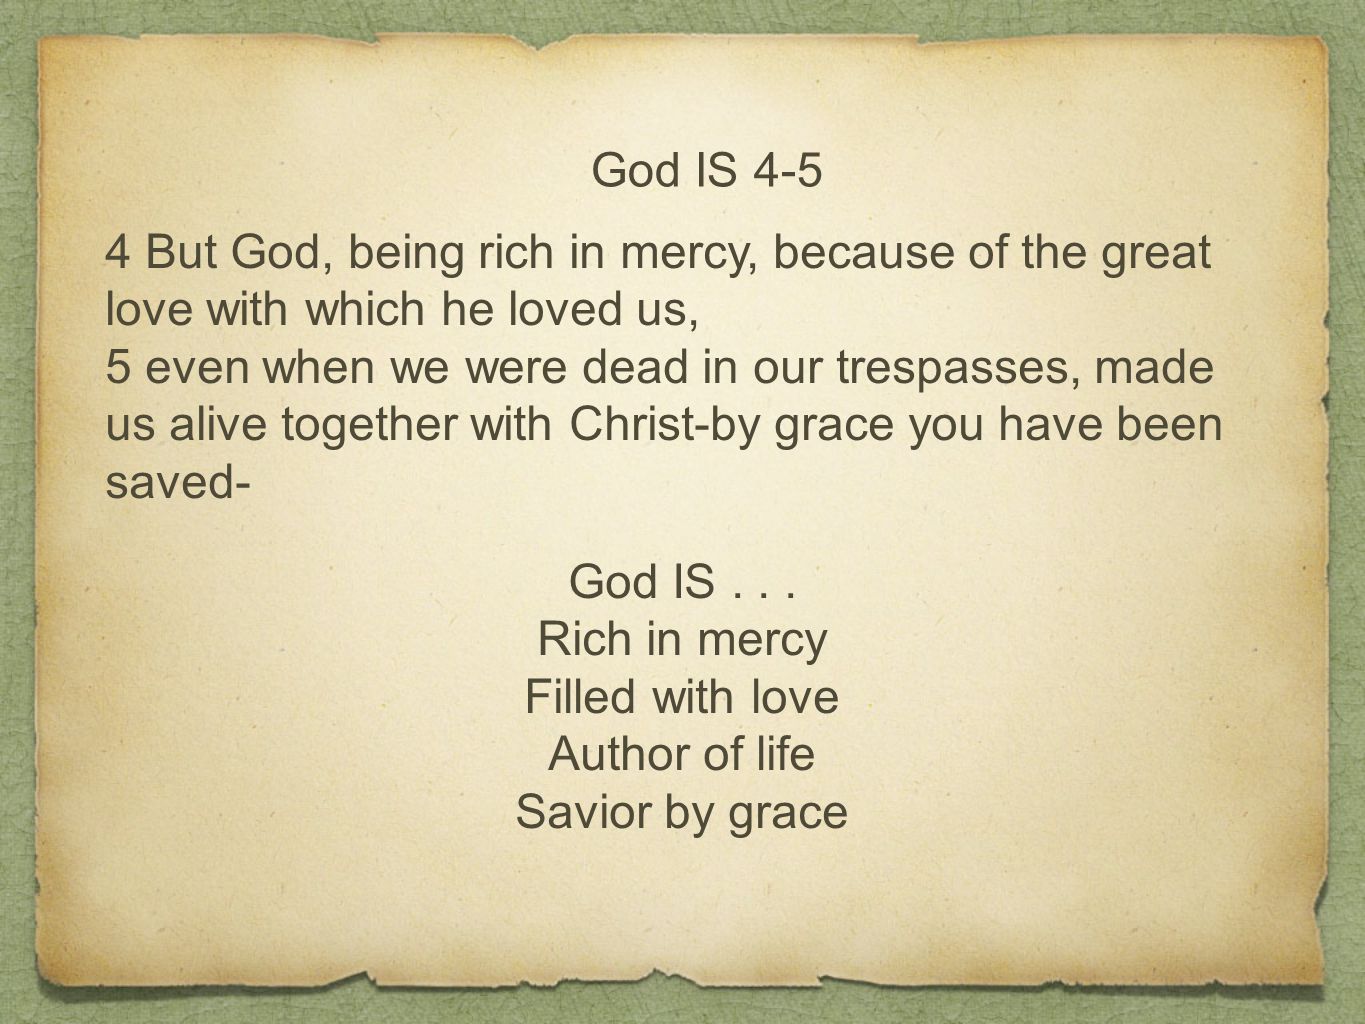 God IS But God, being rich in mercy, because of the great love with which he loved us, 5 even when we were dead in our trespasses, made us alive together with Christ-by grace you have been saved- God IS...